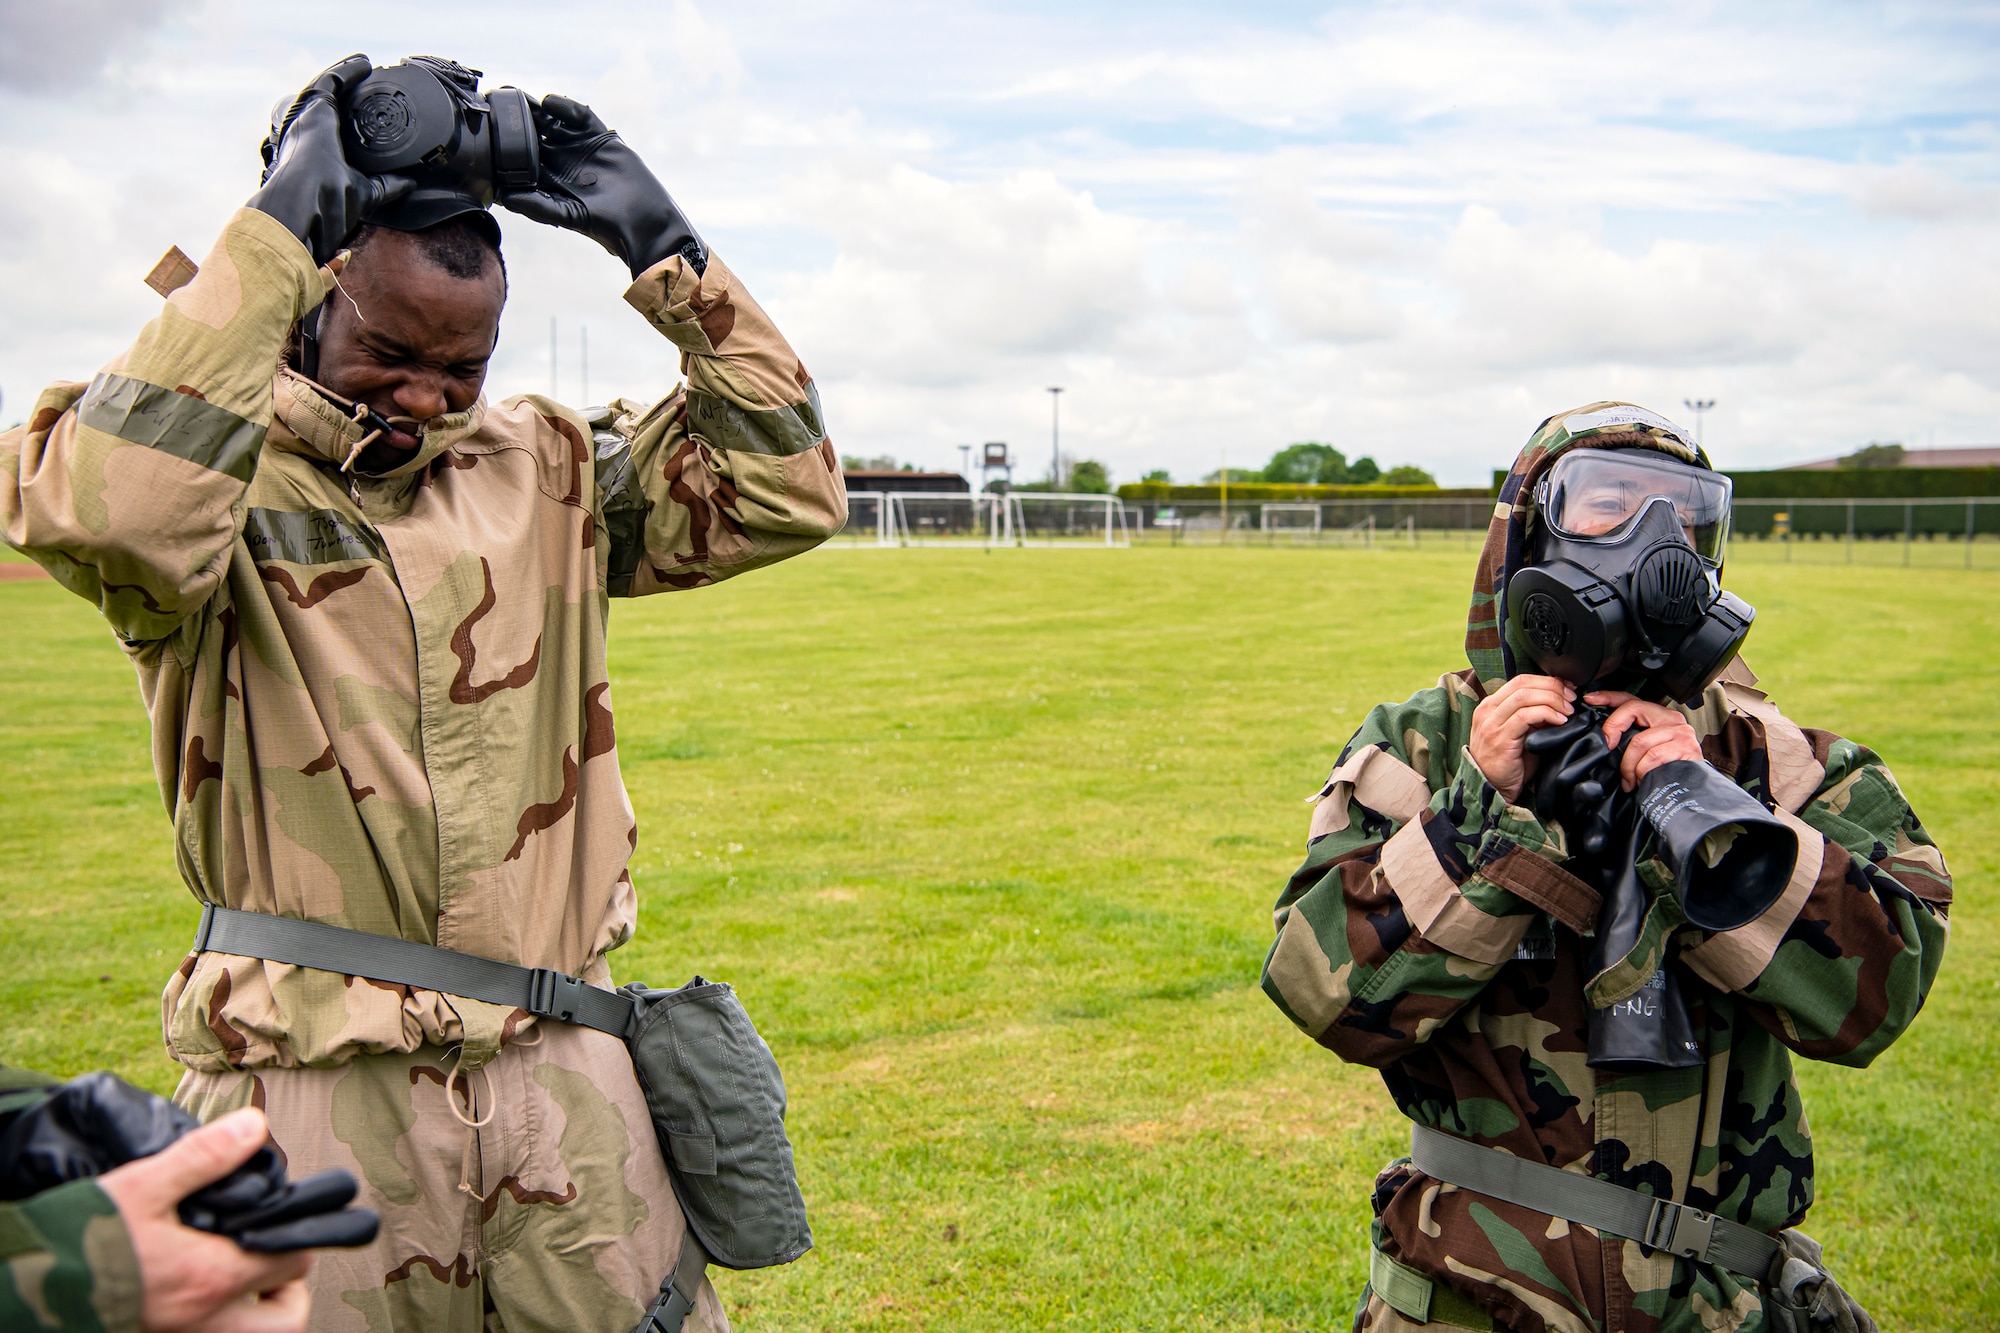 Airmen from the 423d Civil Engineer Squadron, take off their Mission Oriented Protective Posture gear following an exercise at RAF Alconbury, England, May 19, 2022. The exercise was geared towards training Airmen on how to properly control and examine a contaminated area after a simulated chemical attack while in Mission Oriented Protective Posture Gear. (U.S. Air Force photo by Staff Sgt. Eugene Oliver)